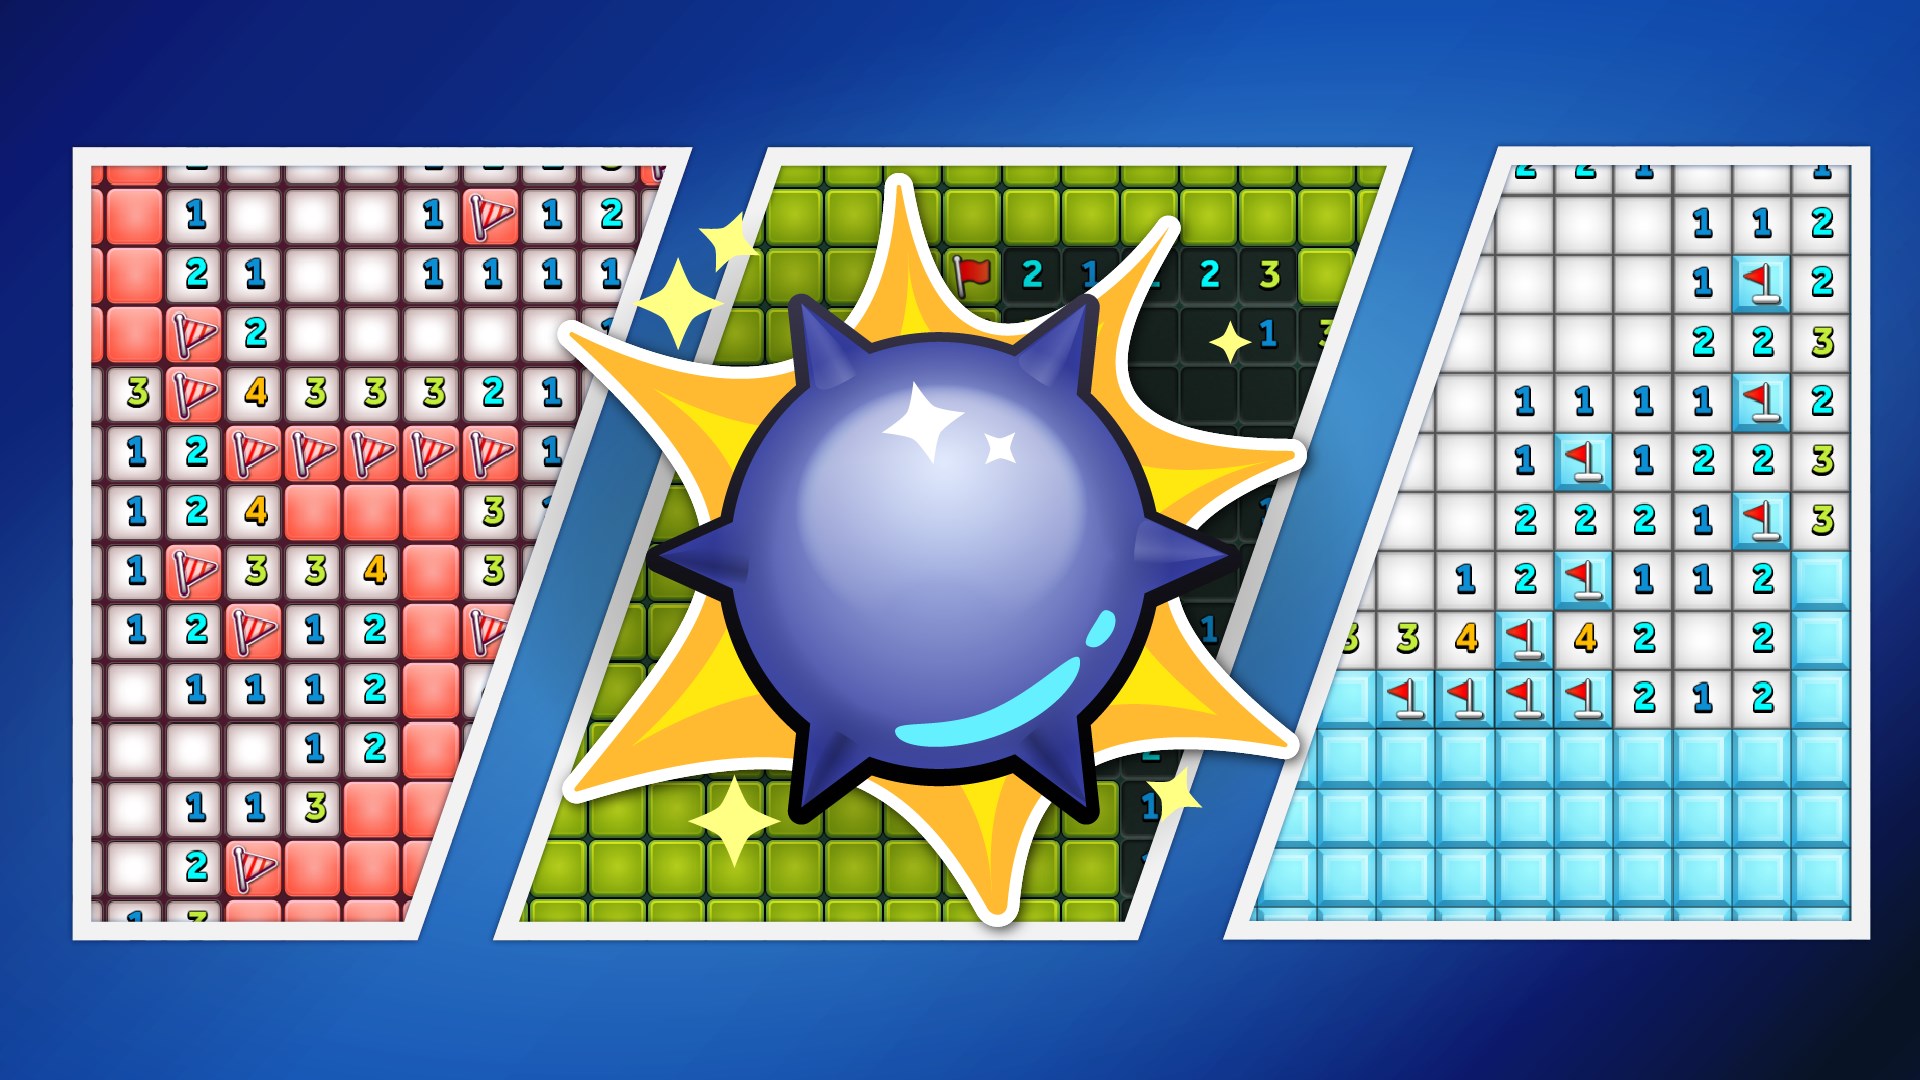 Campo Minado Online Minesweeper Online Challenge Classic for Windows 10+ -  Microsoft Apps